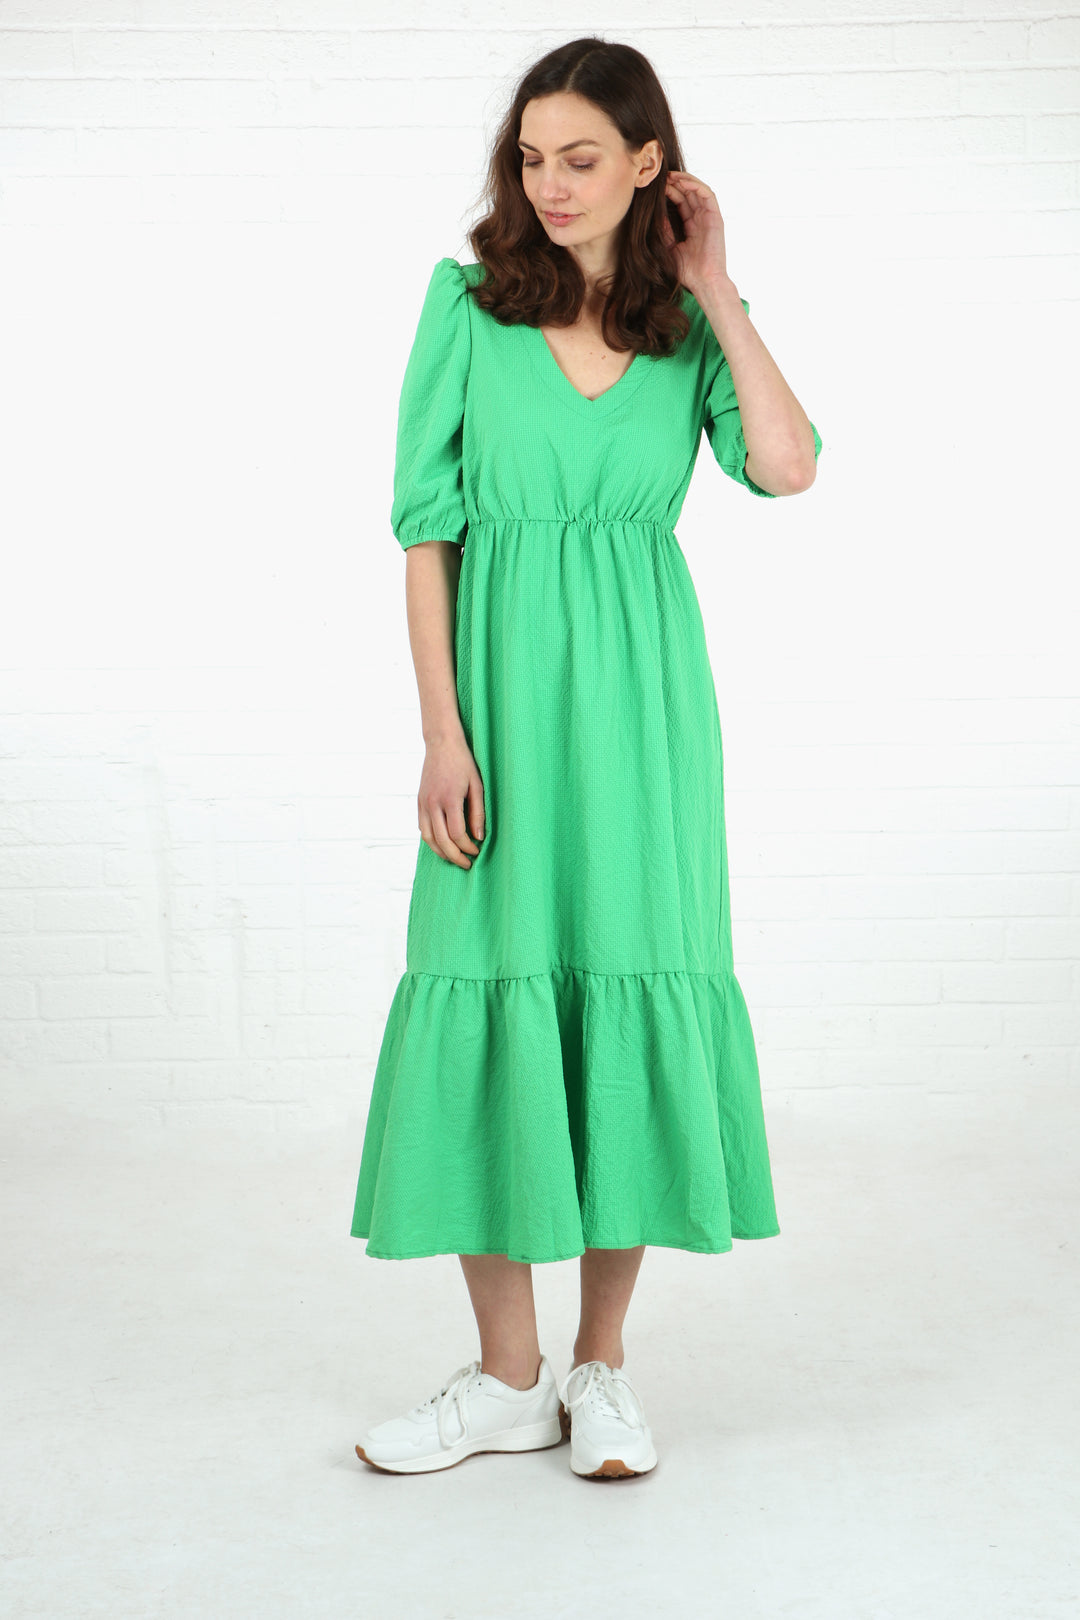 model wearing a textured green midi dress with elbow length puff sleeves and a tiered hem